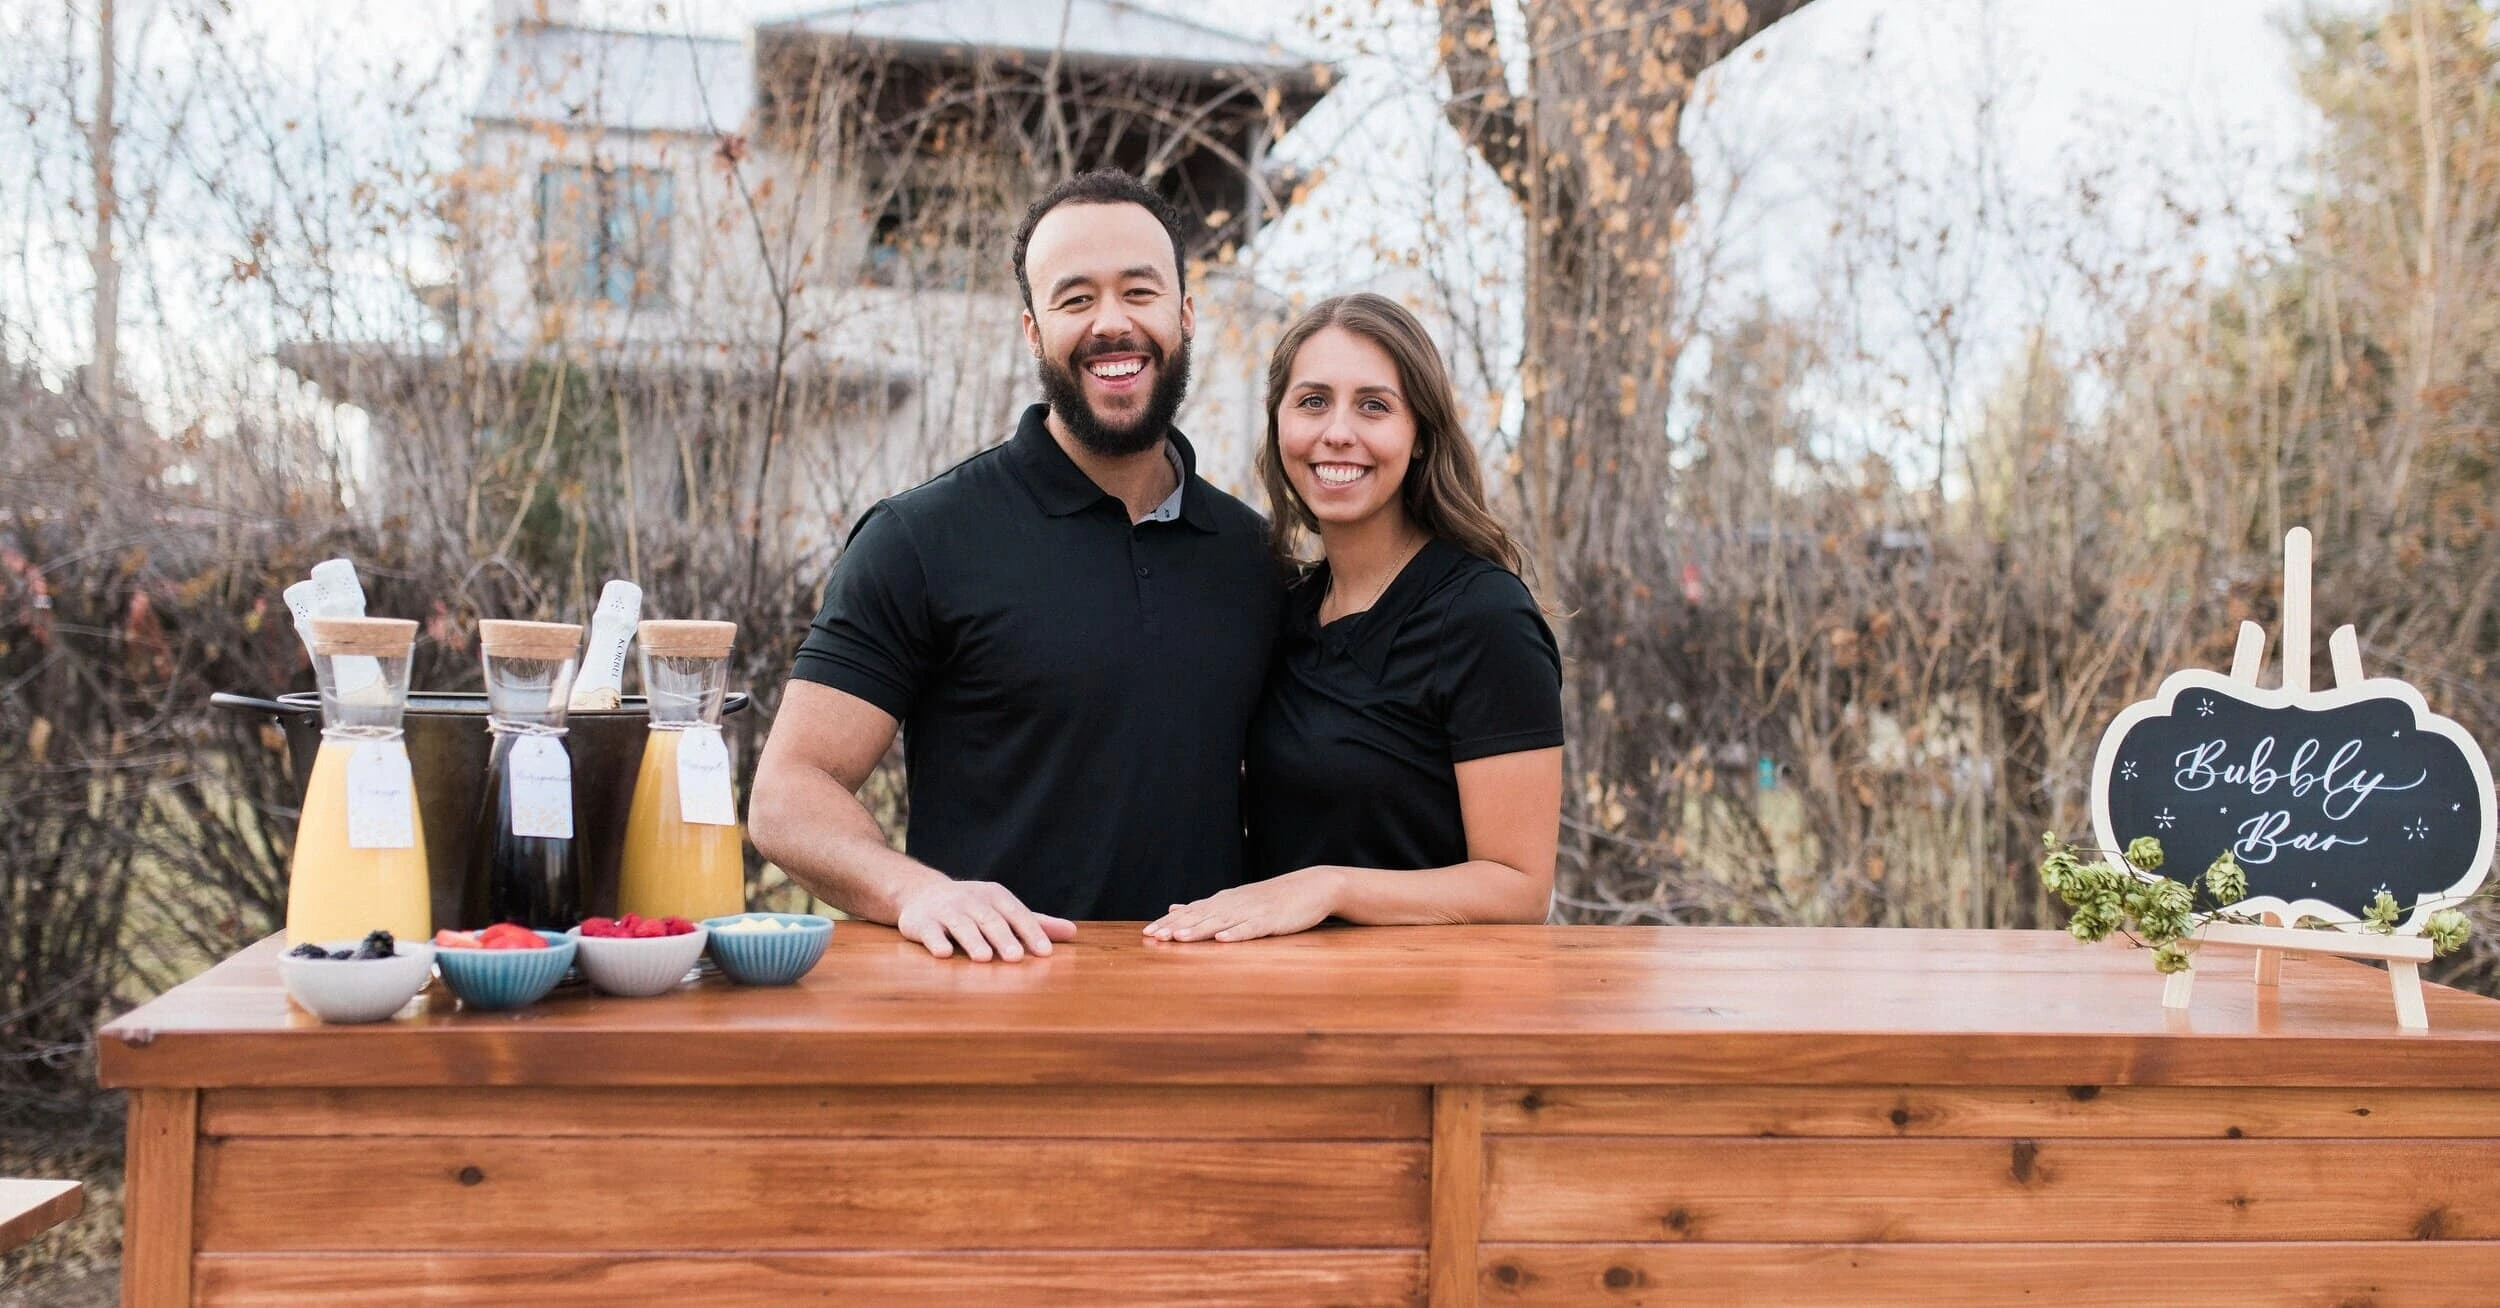 Wandering Wagon Bars co-owners Forest Lloyd and Cassie Lopez mobile bartending